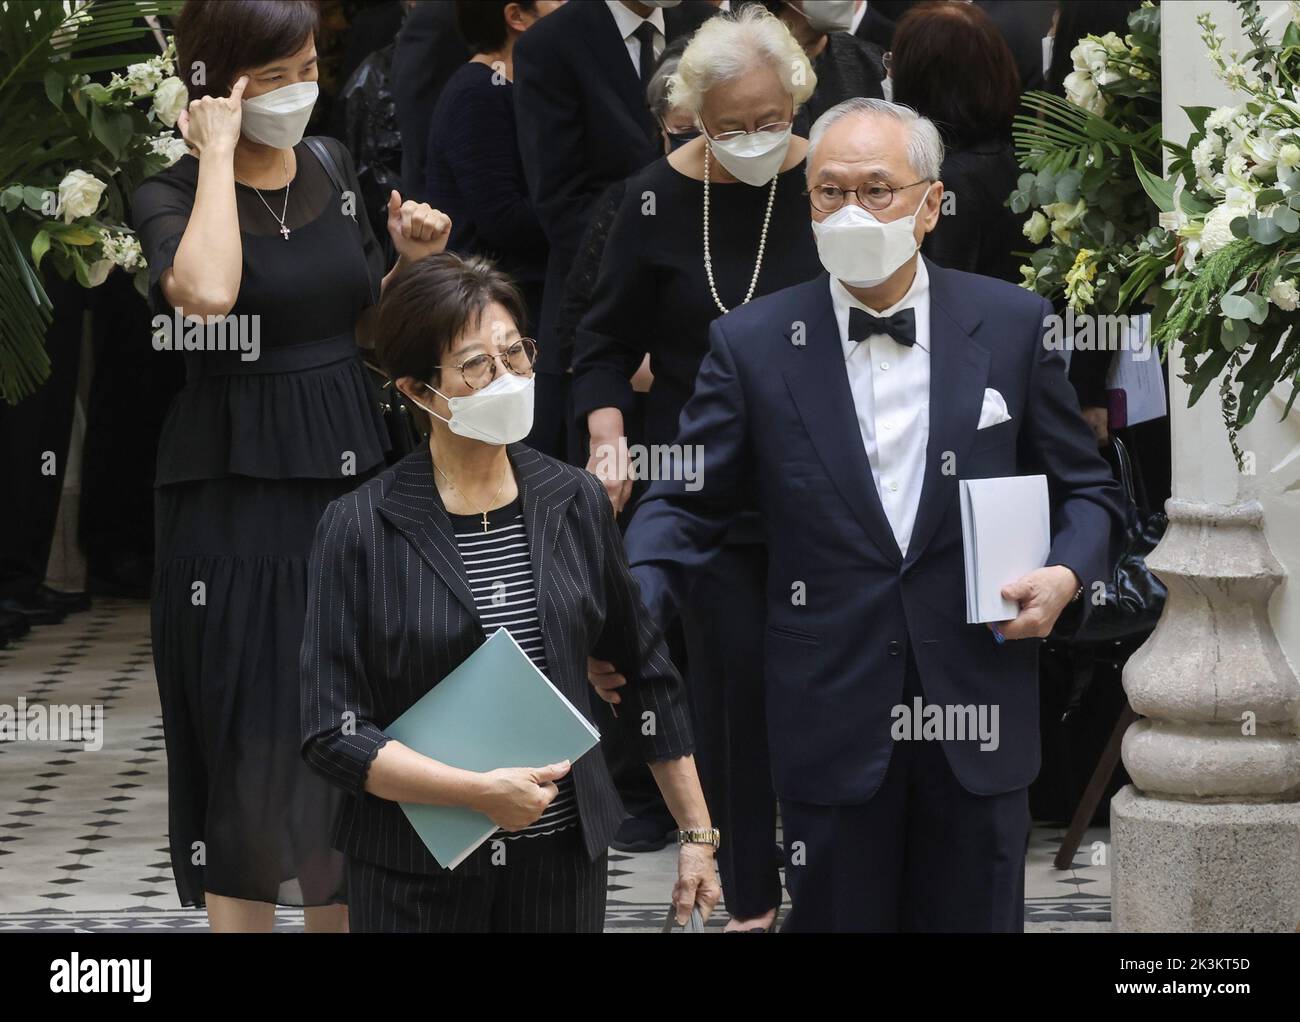 Former Chief Executive Donald Tsang Yam-kuen and his wife Selina Tsang Pau Siu-mei attending the funeral service for former HSBC banker Vincent Cheng Hoi-chuen, at St. John's Cathedral in Central. 21SEP22 SCMP / Jonathan Wong Stock Photo